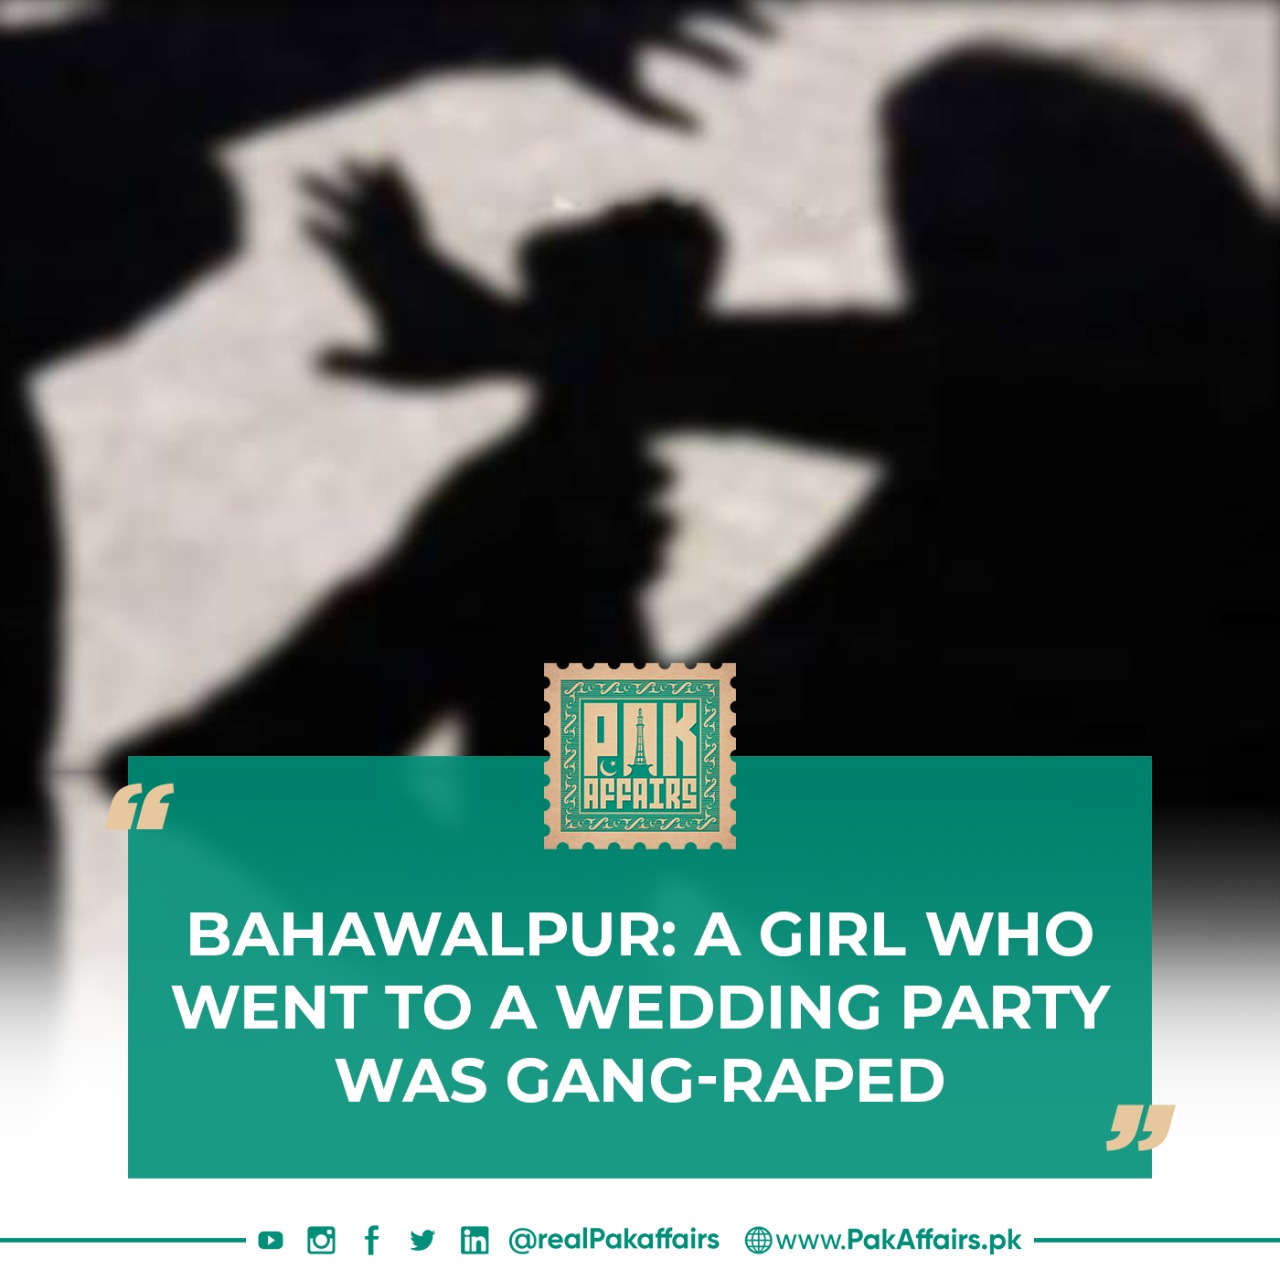 Bahawalpur: A girl who went to a wedding party was gang-raped.